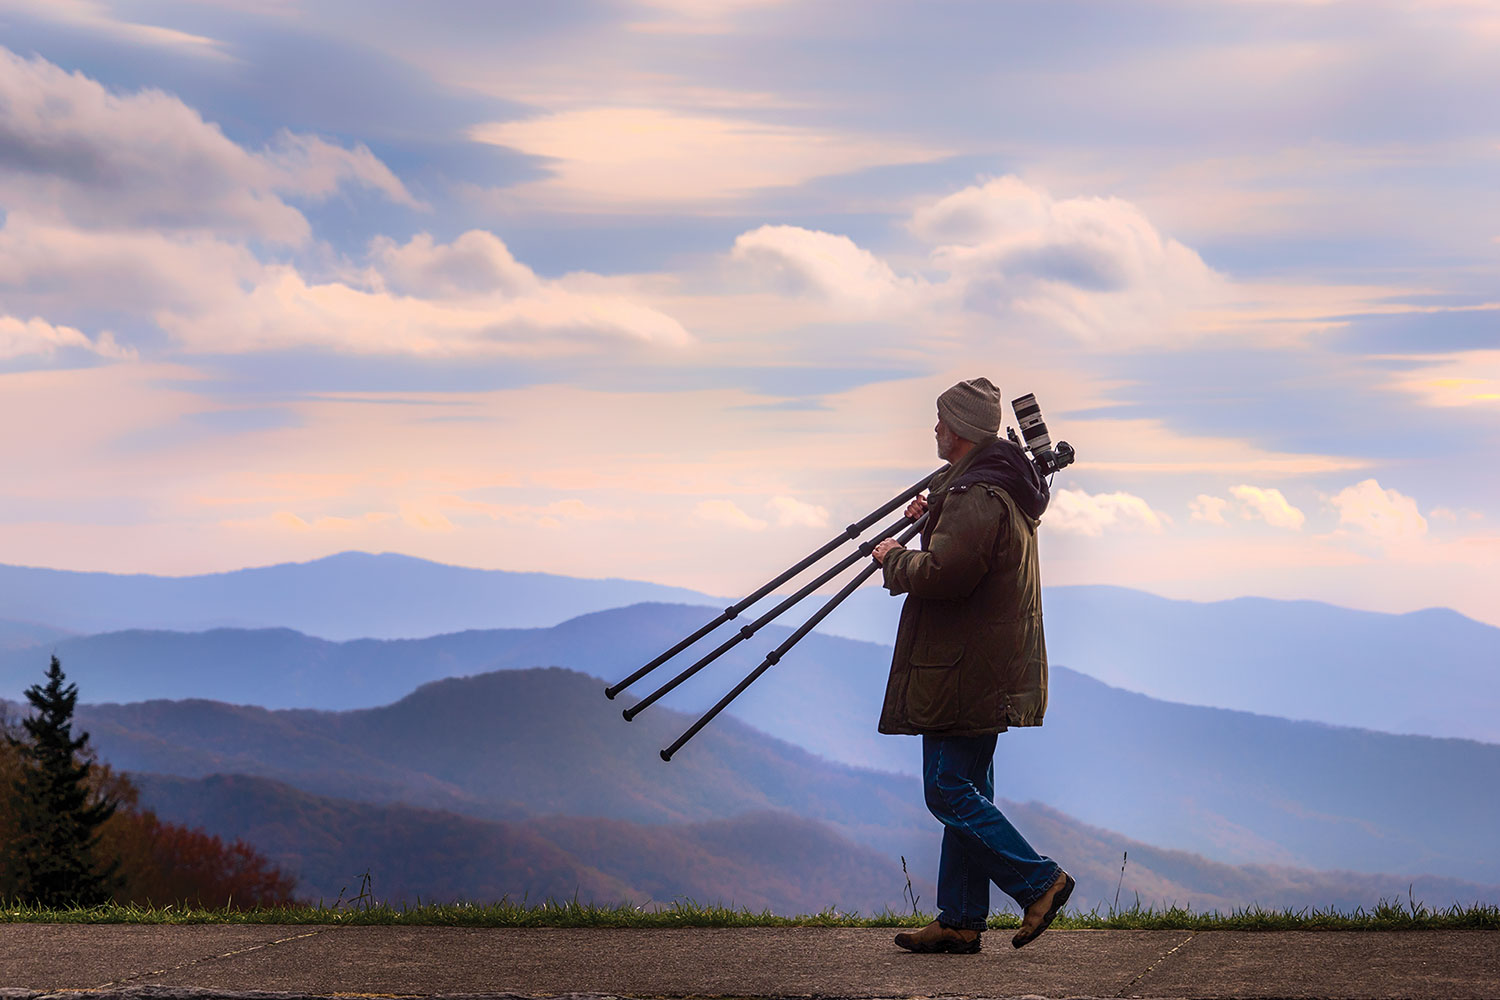 Sam Stapleton dressed in winter gear carries his tripod and camera as he walks along as sidewalk with a mountainous view in the background.